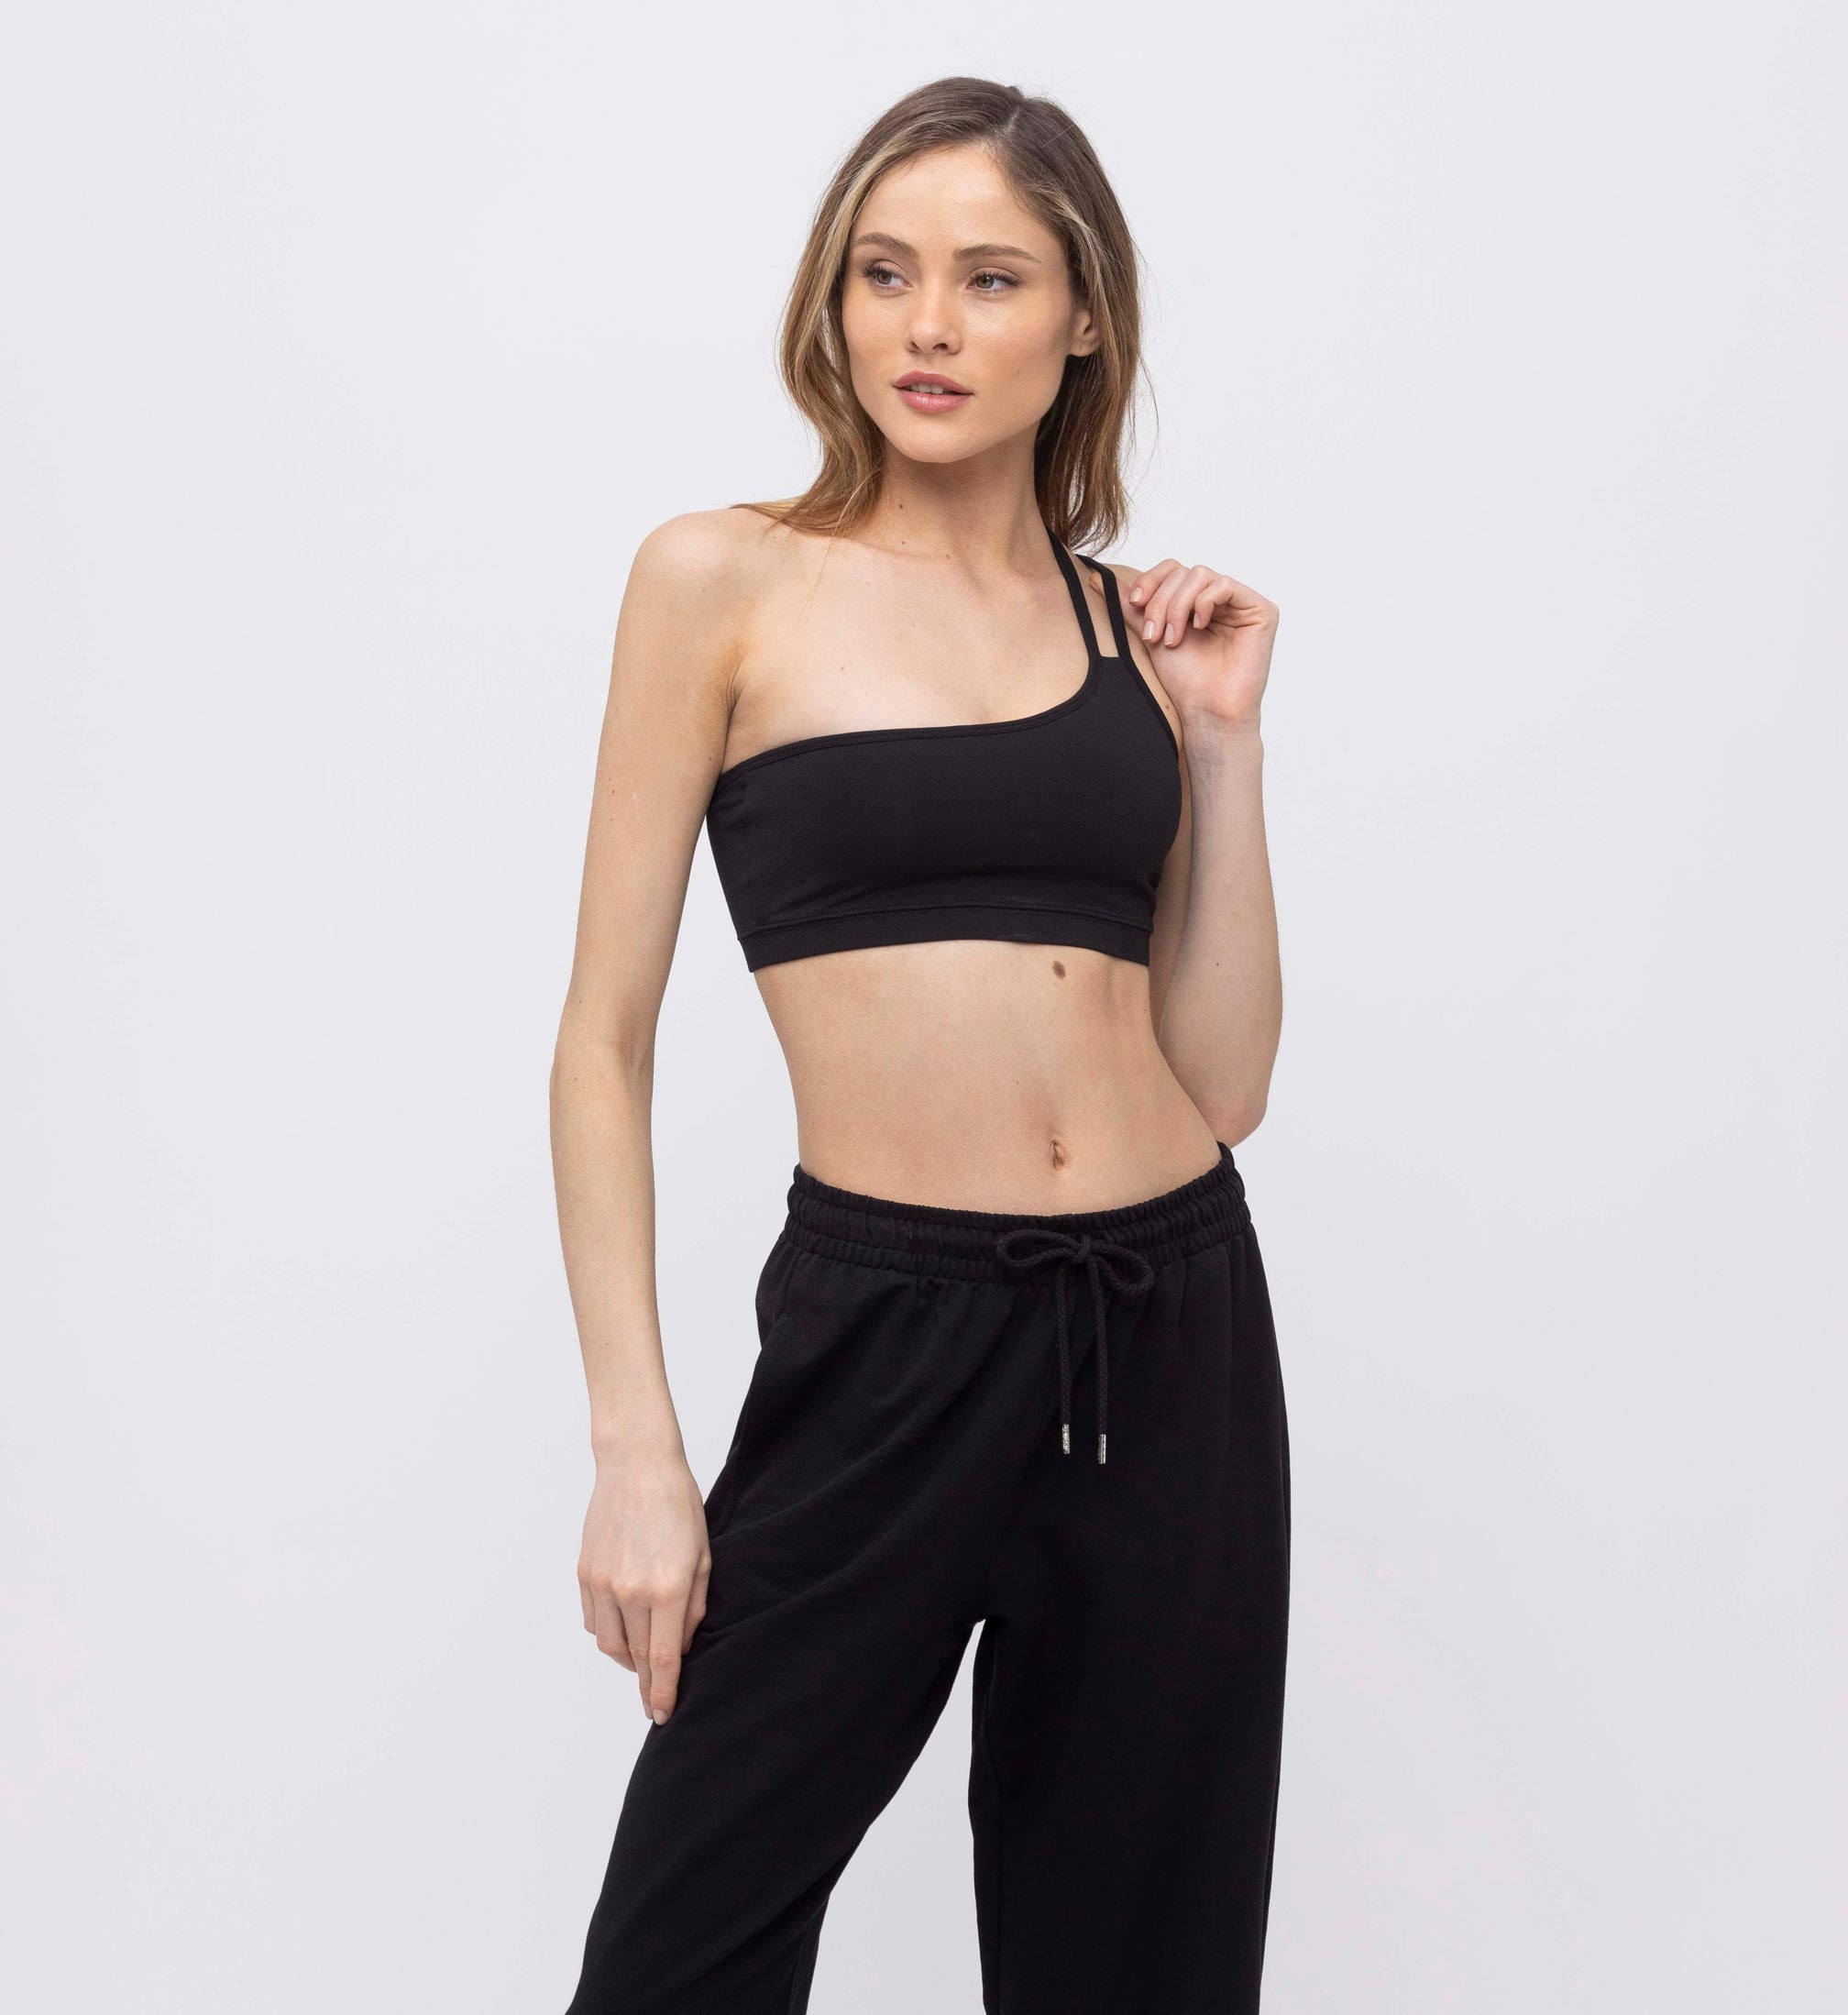 Shoppers of All Cup Sizes Swear By This $12 Bralette